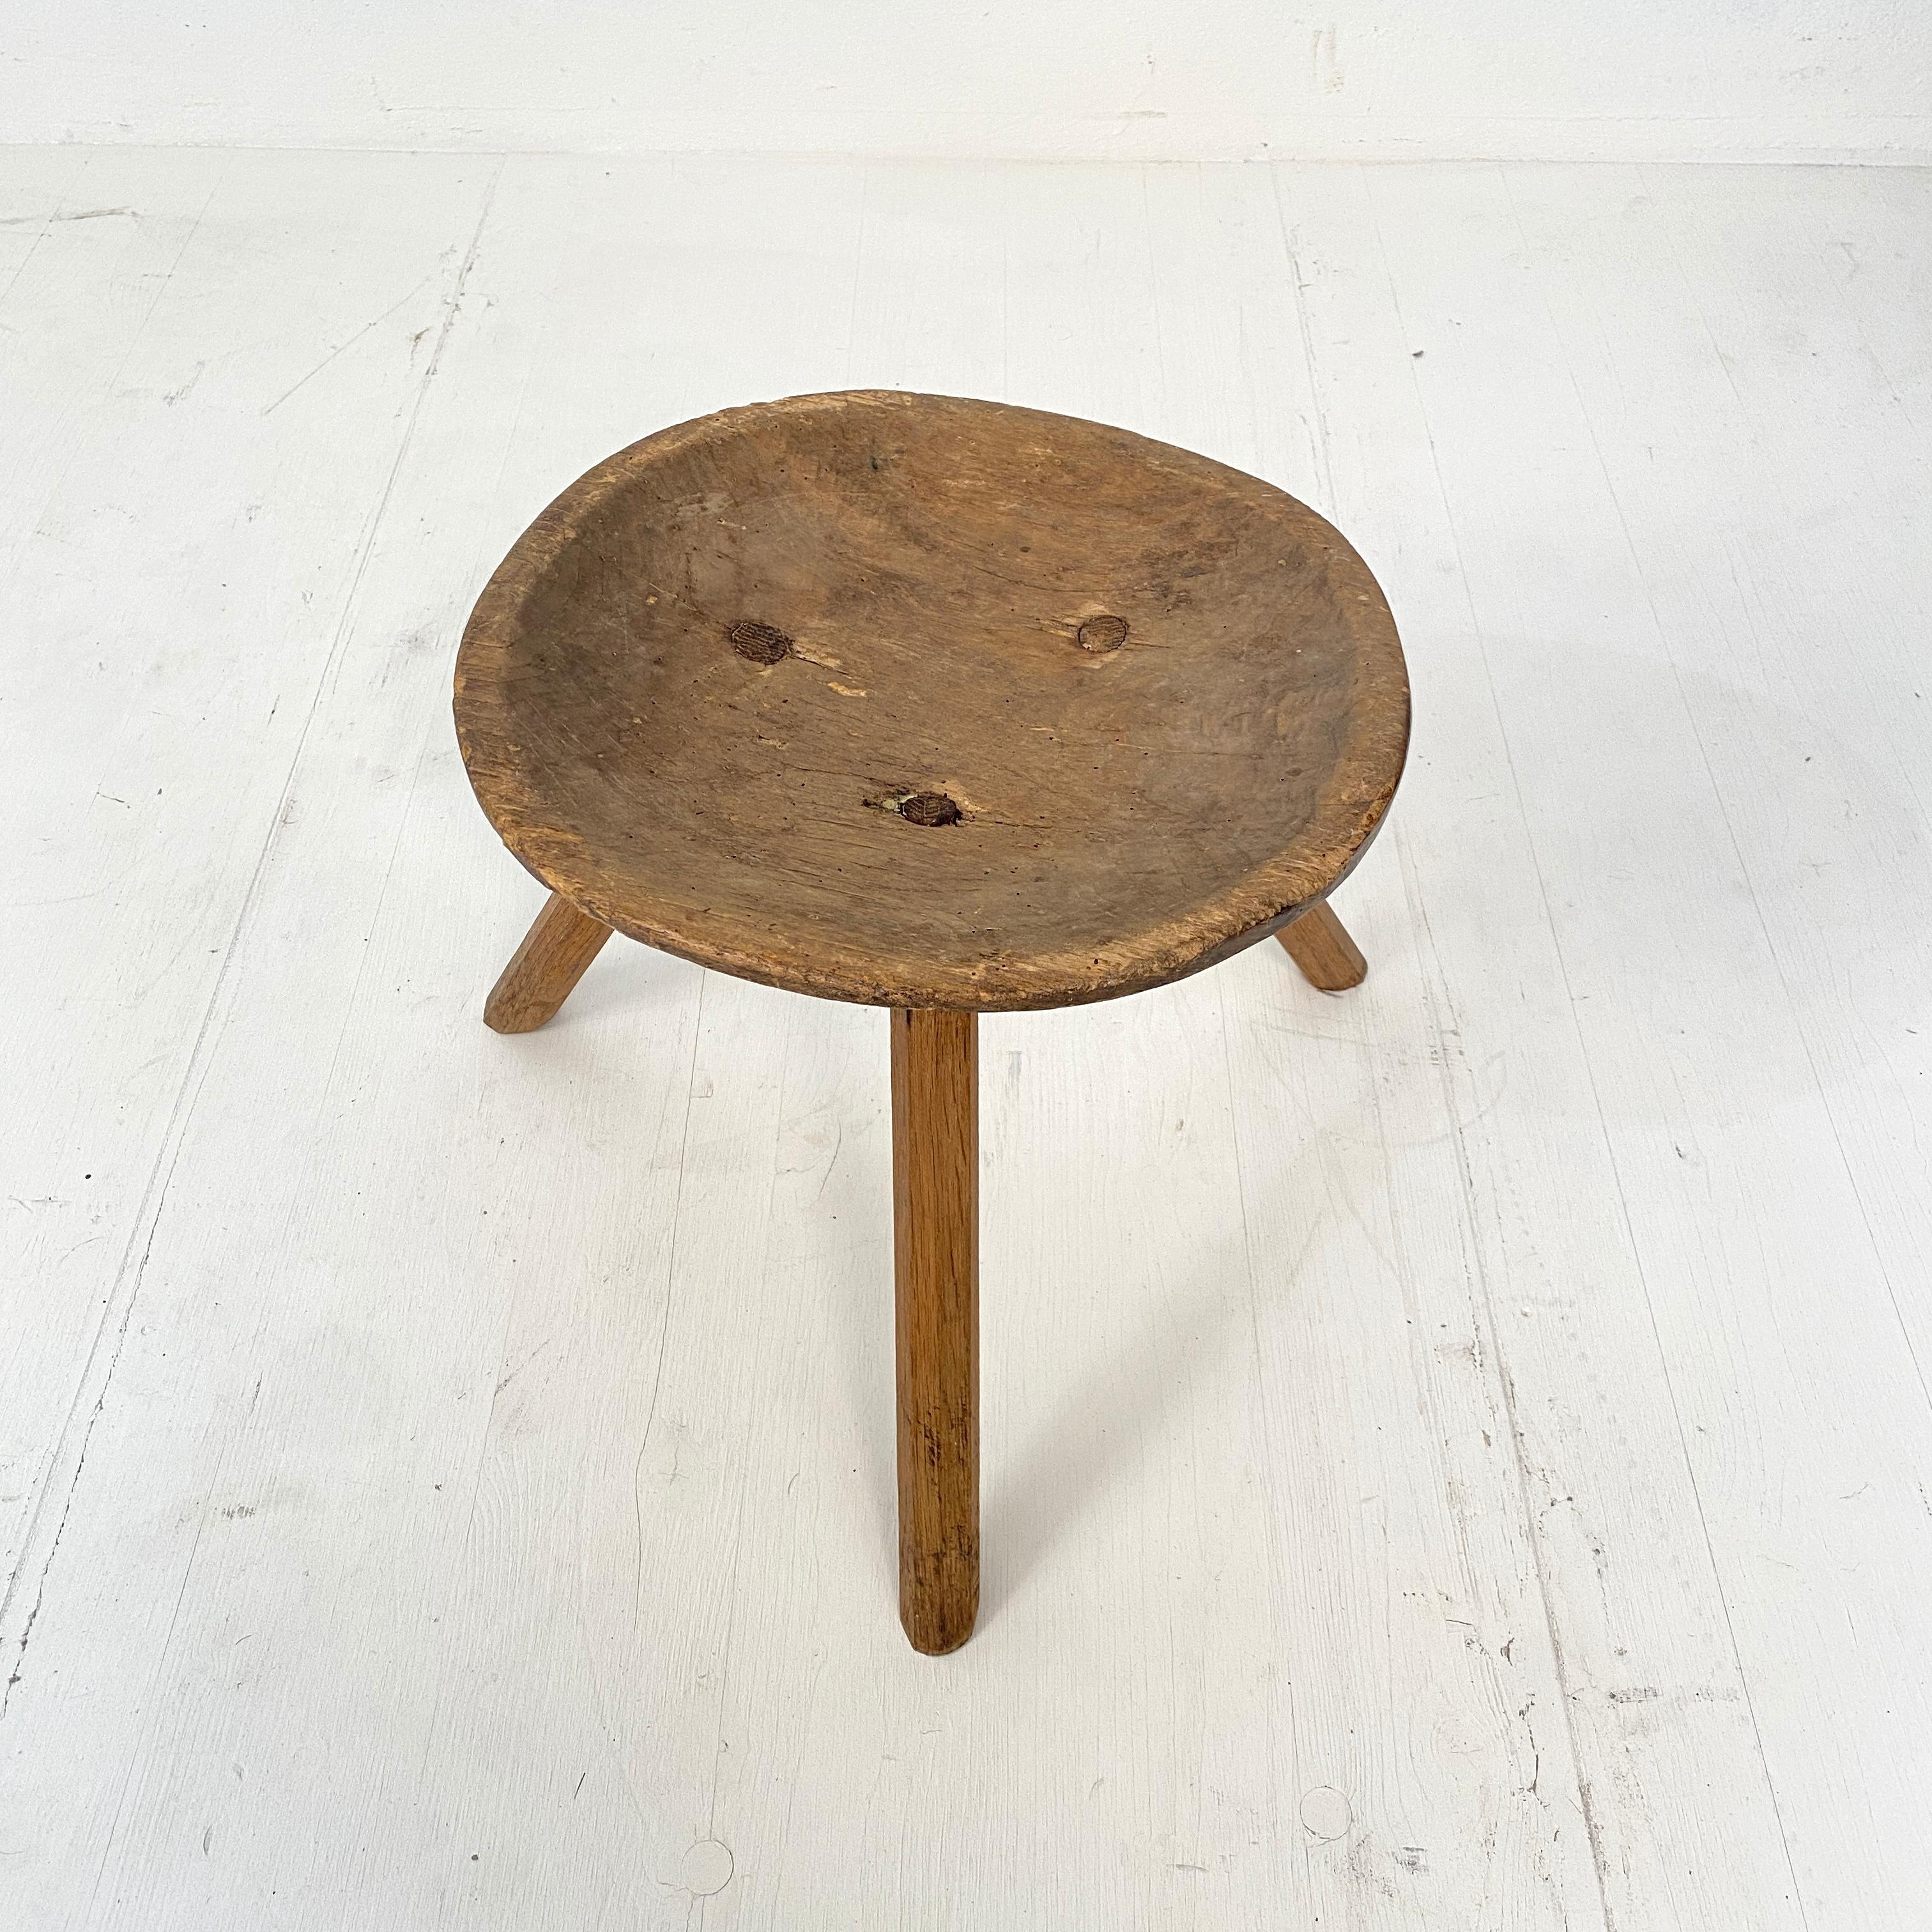 This primitive milking splayed leg wood stool was made circa 1910. The seat is out of a solid piece of ash and the legs are made out of beech. The seat is beautifully carved out of one single piece.
It has this fabulous Wabi Sabi look and beautiful